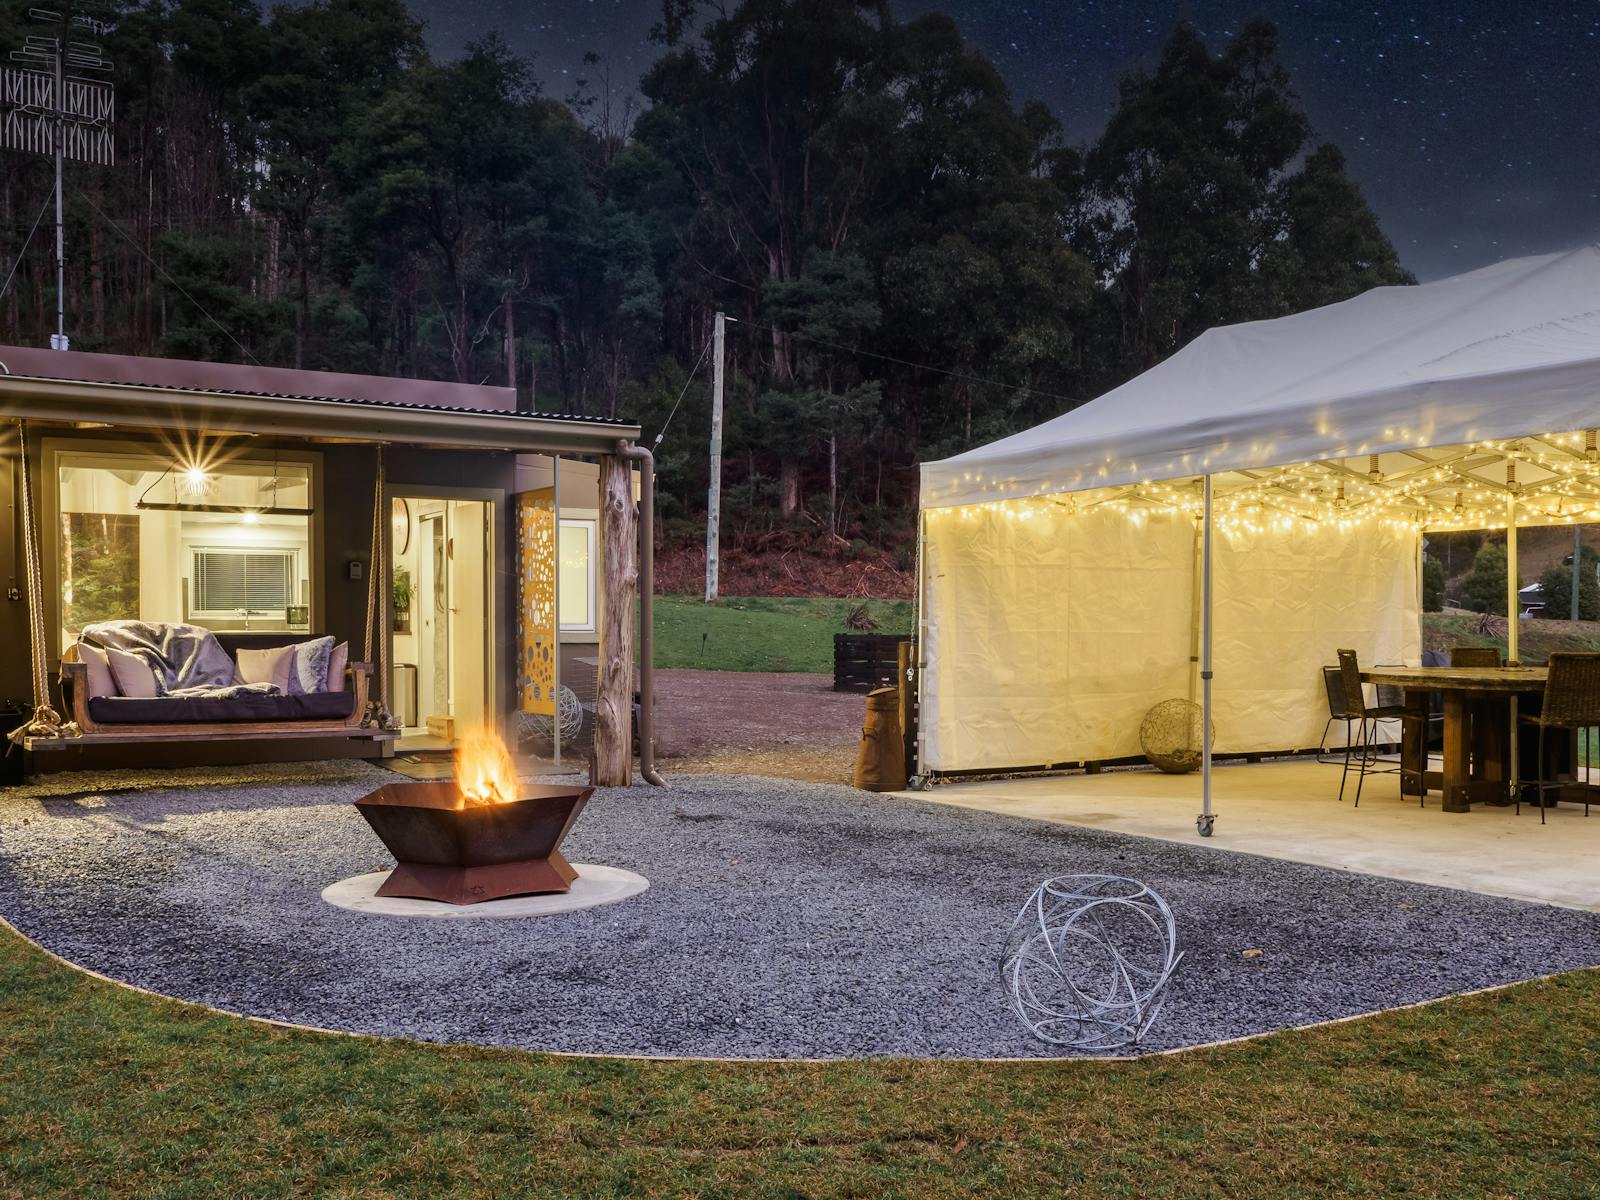 Fire pit, bespoke swinging couch with above heating, level area large marquee with 800 fairy lights